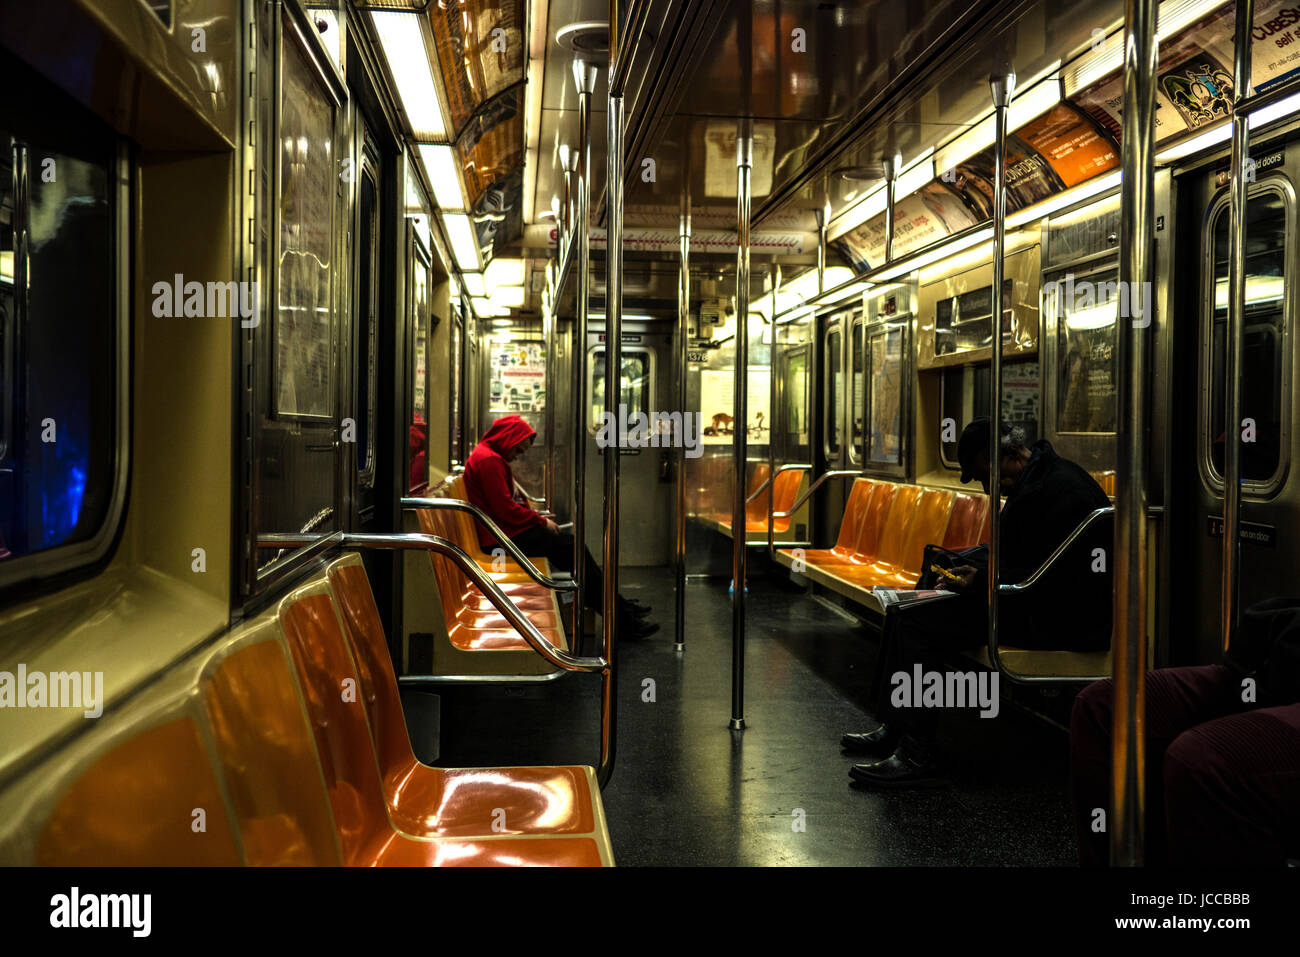 Interior picture of New York Subway car Stock Photo